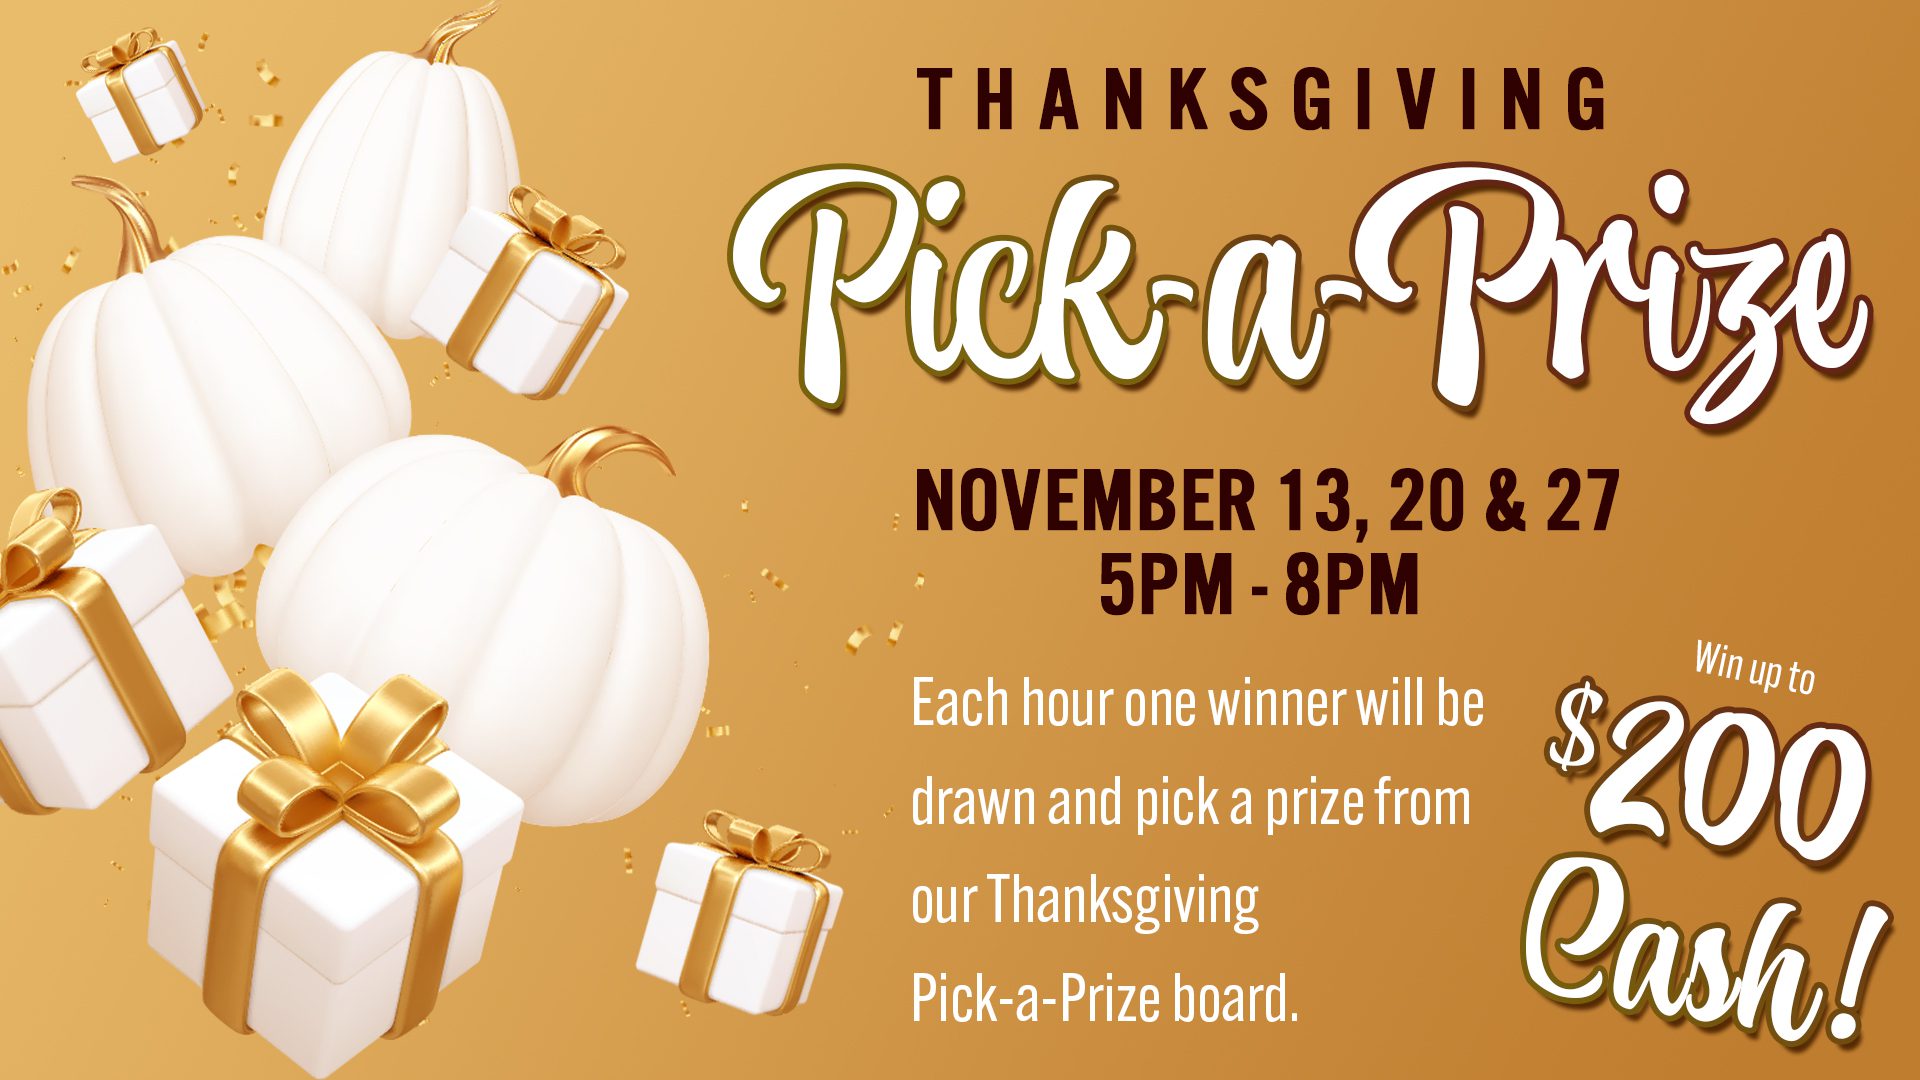 Thanksgiving-themed promotional banner for a 'pick-a-prize' event with dates, times, and potential $200 cash prize highlighted, set against a festive background with pumpkins and gifts.